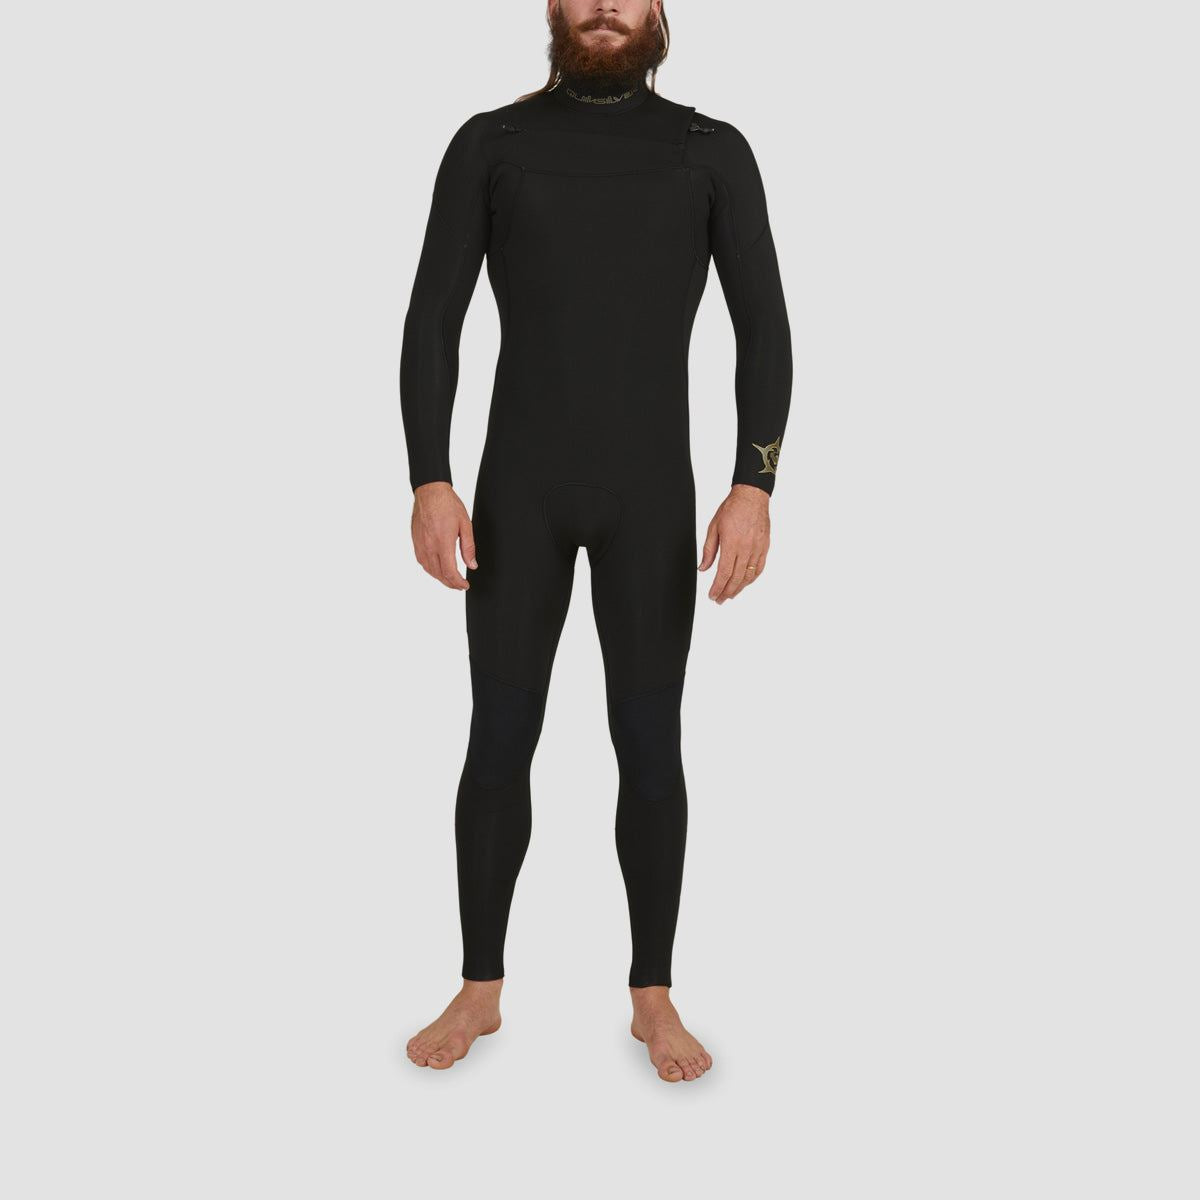 Quiksilver Everyday Sessions MT 3/2mm Chest Zip Wetsuit Black